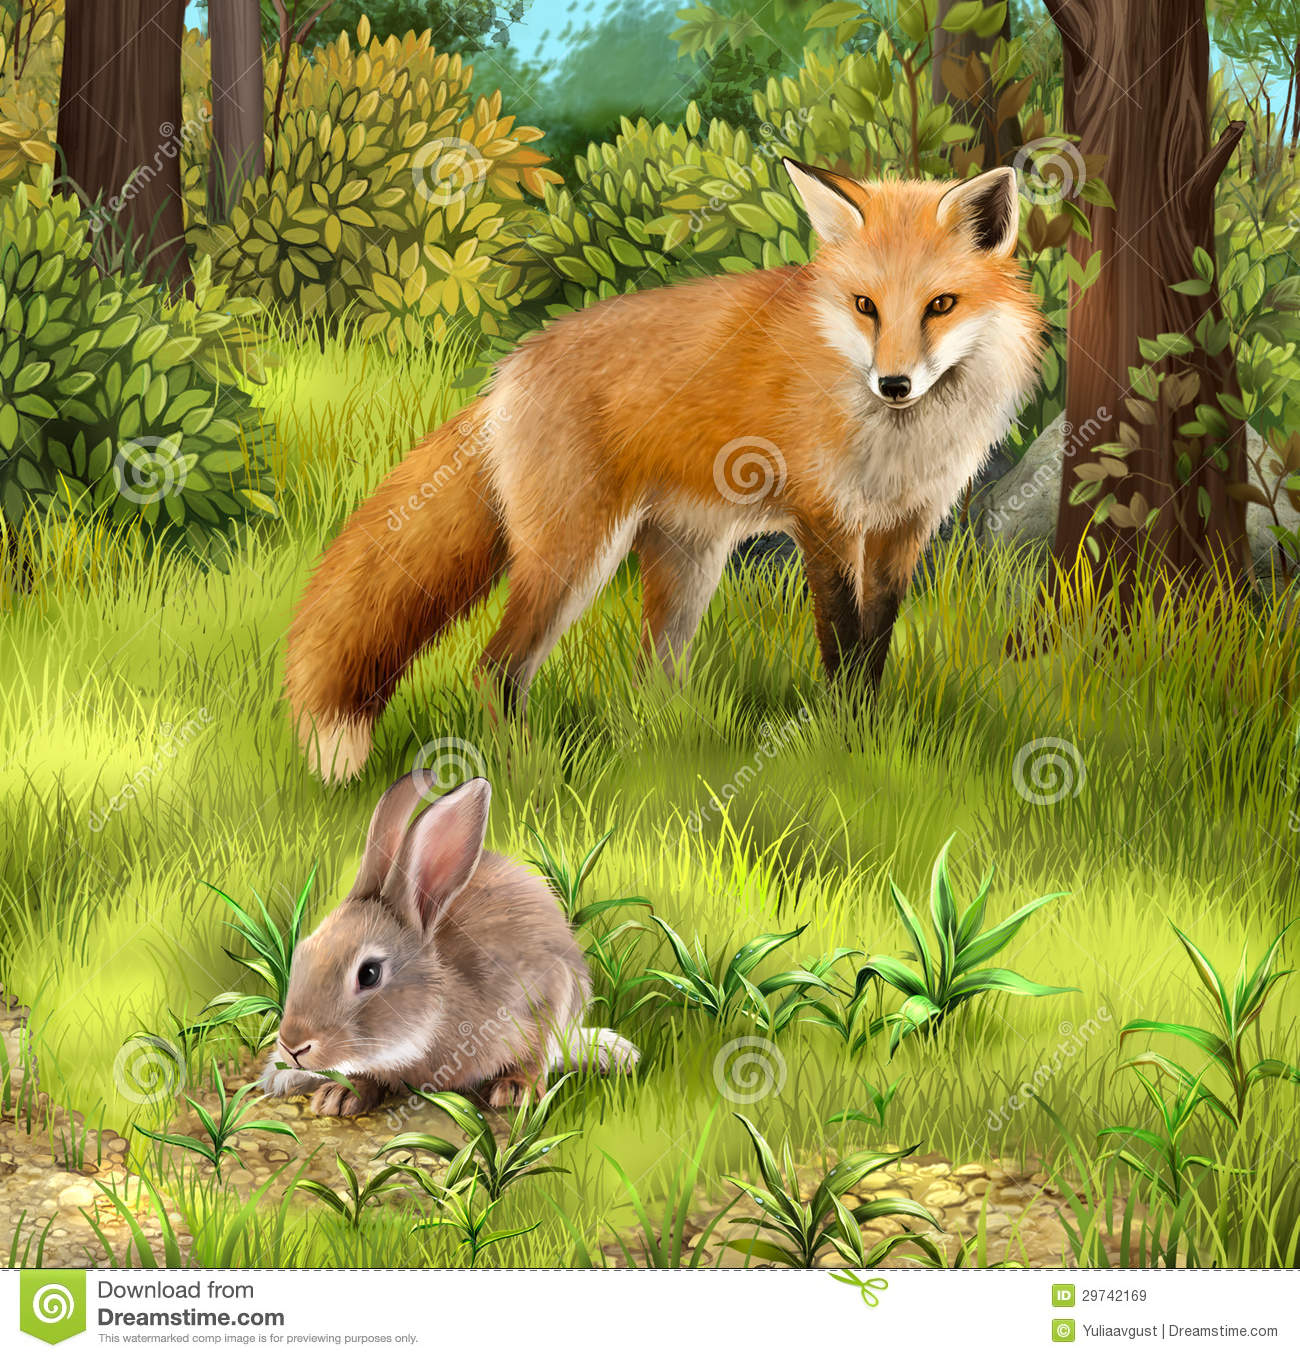 Gray Hare Eating Grass  Hunting Fox In The Forest  Royalty Free Stock